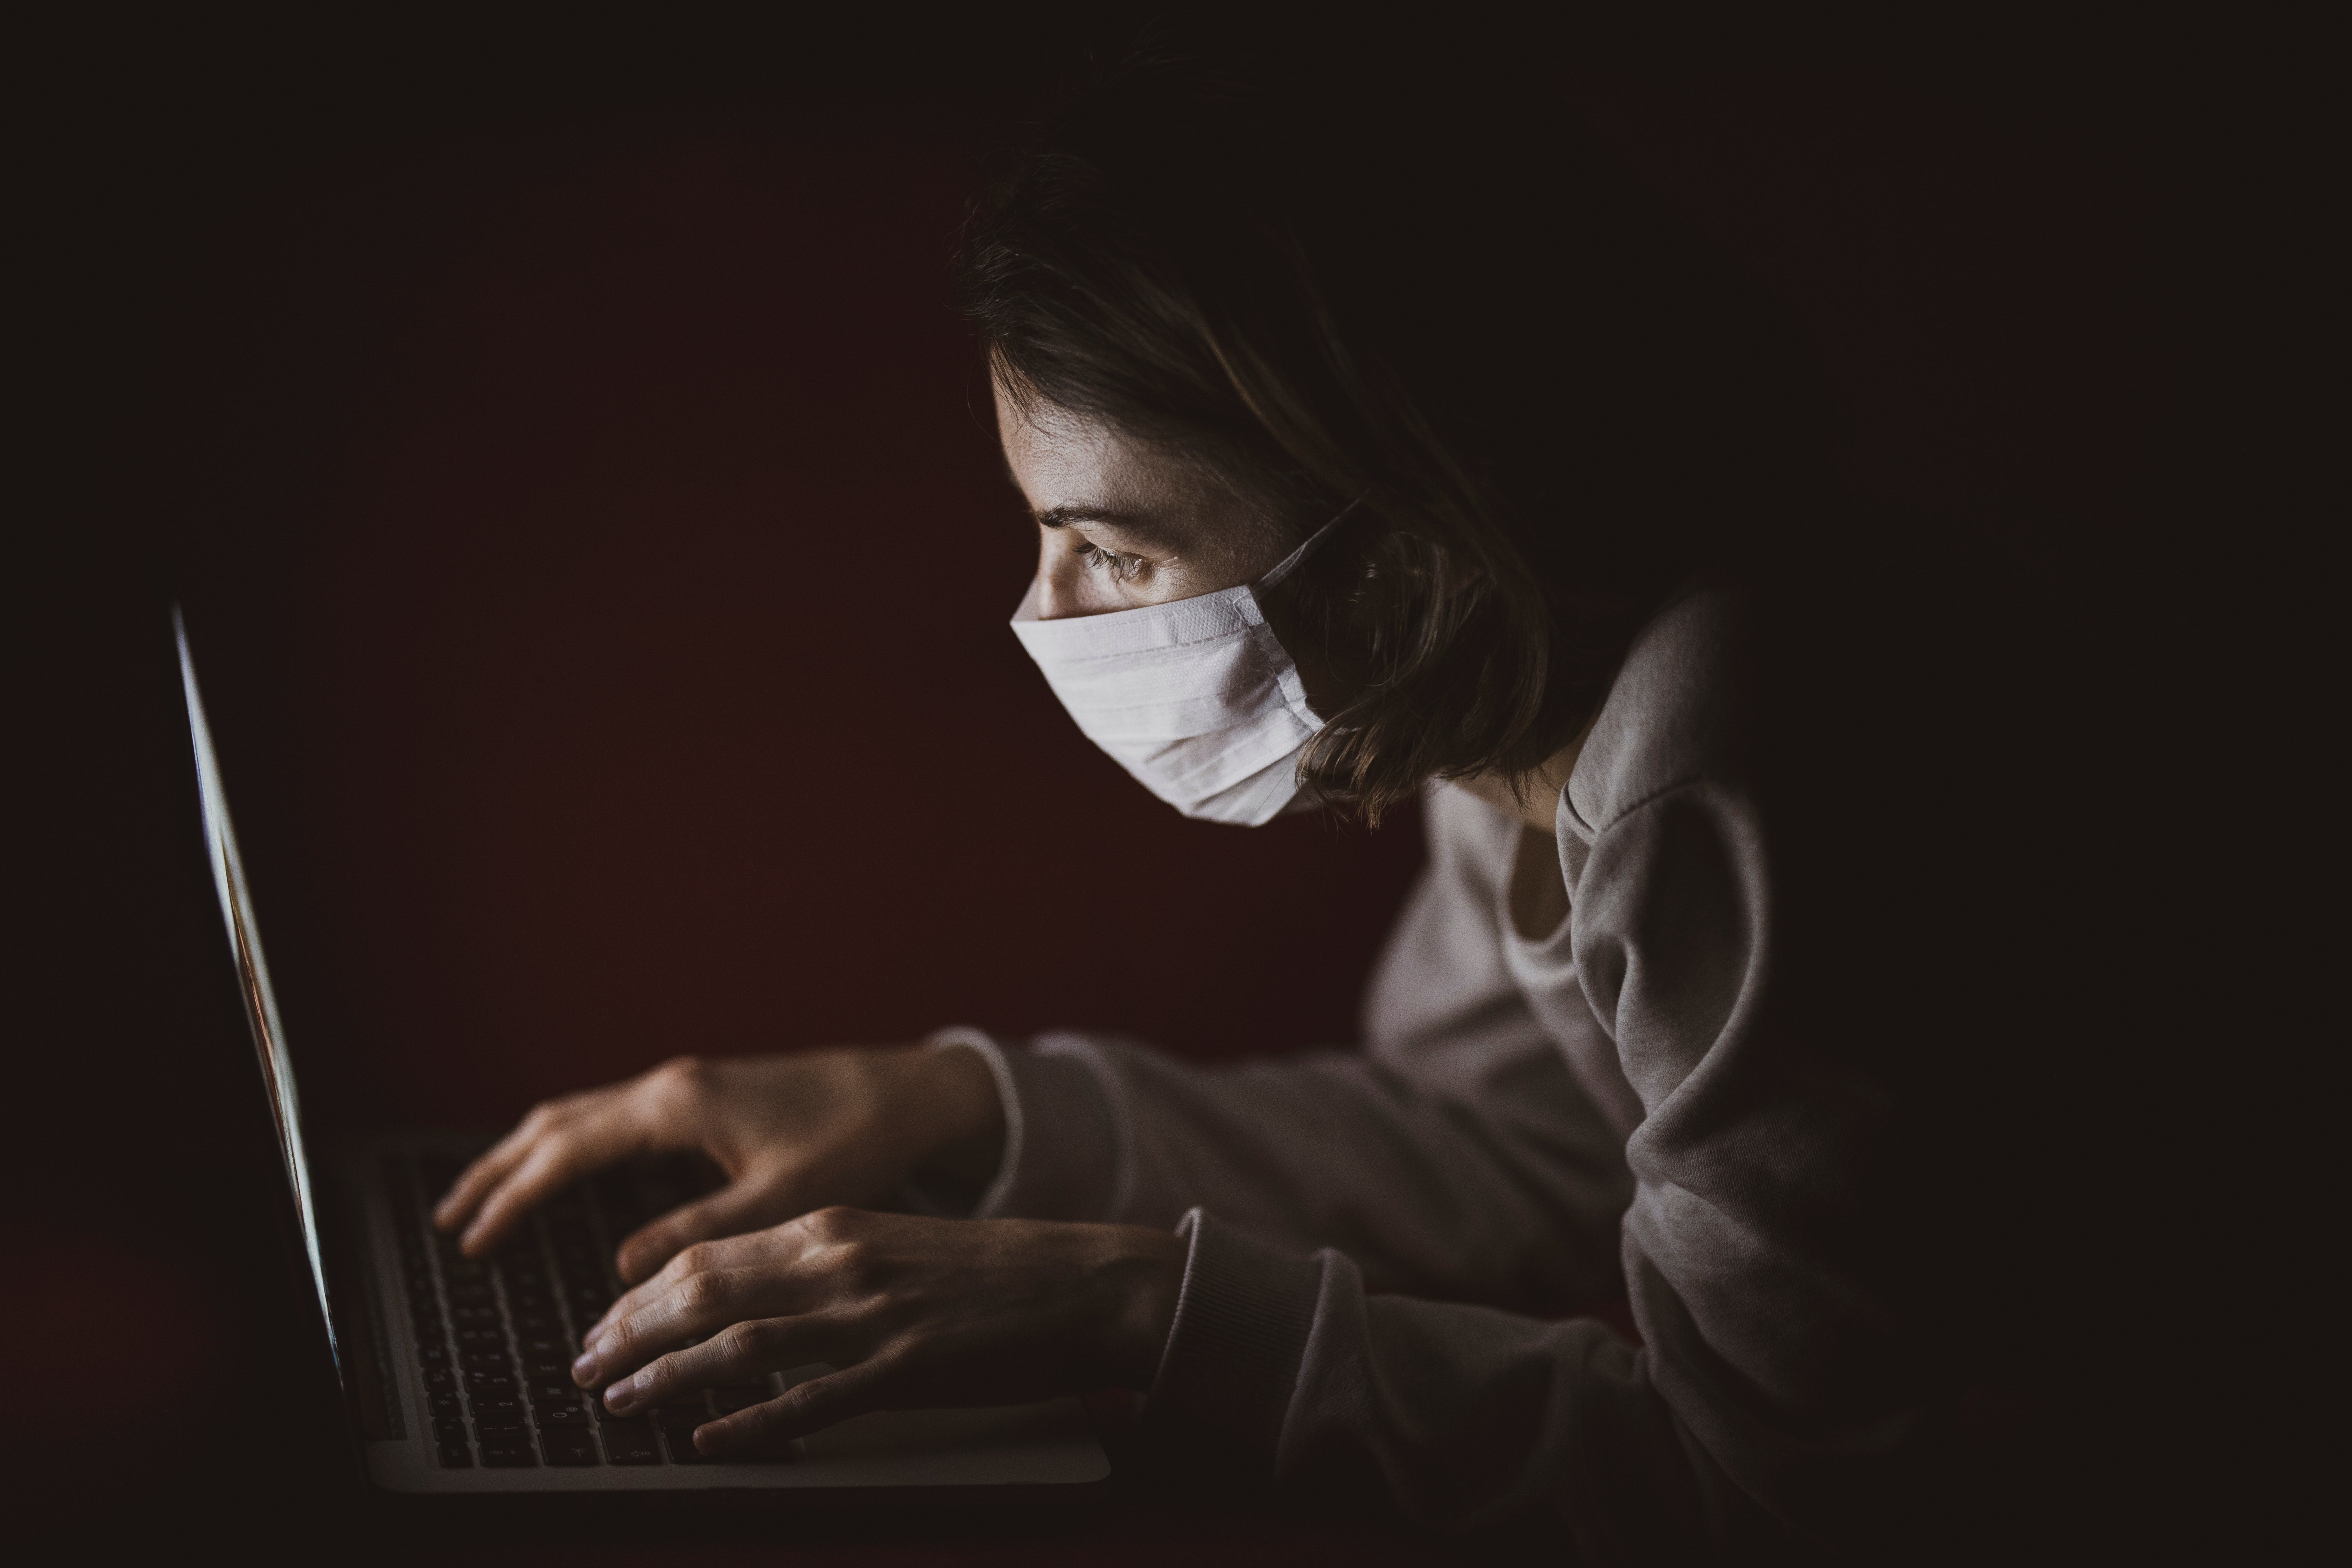 A woman wearing a face mask leans over a laptop.